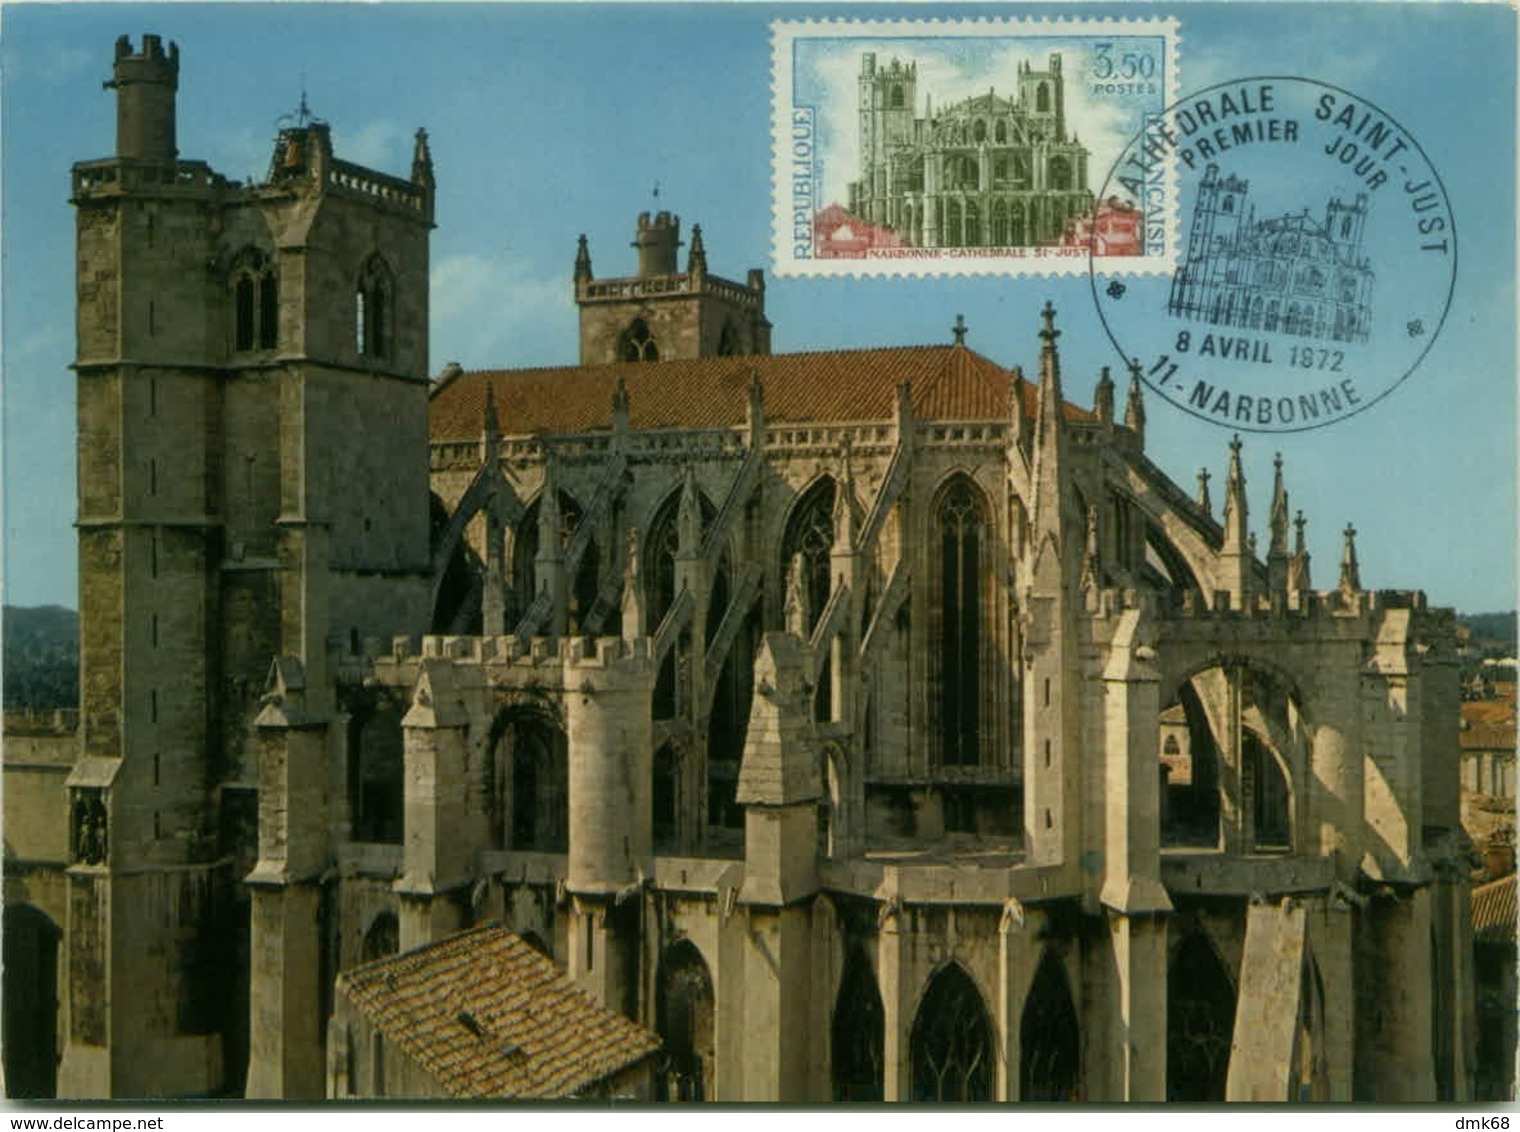 FRANCE - NARBONNE - CATHEDRALE ST-JUST - MAXIMUM CARD - 1972 (BG1972) - 1970-1979